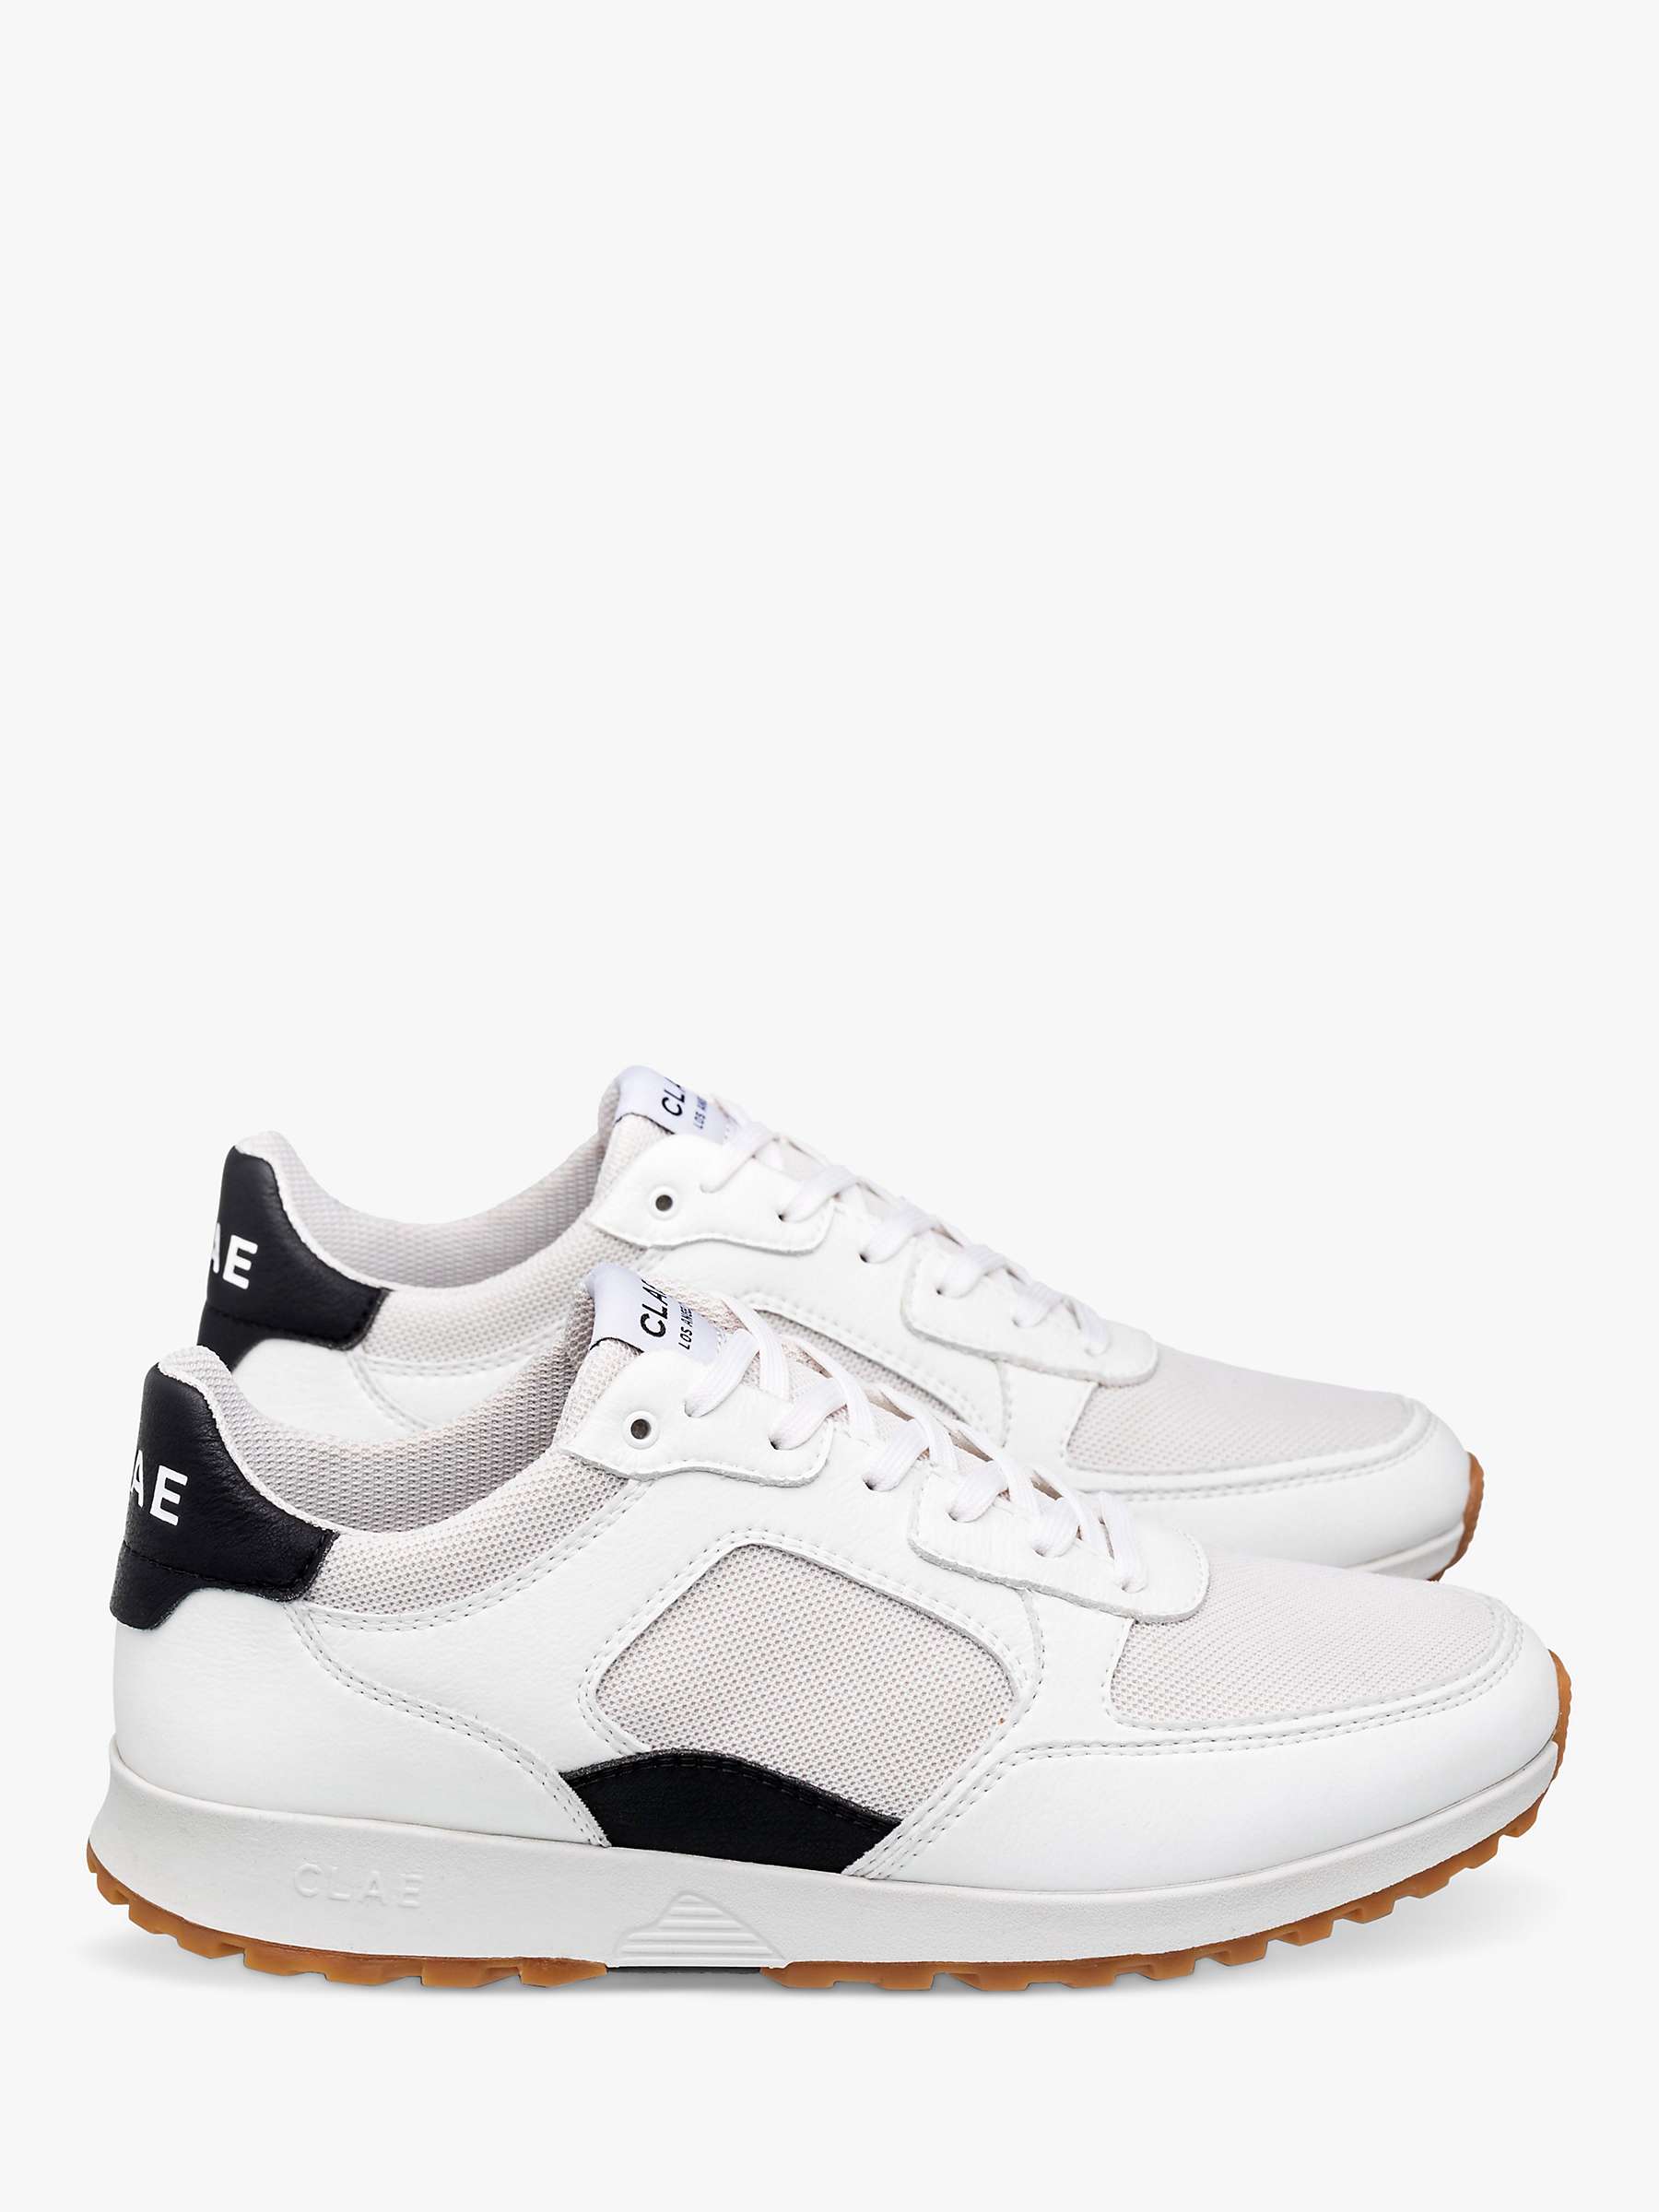 Buy CLAE Joshua Accent Vegan Lace Up Trainers, White/Black Online at johnlewis.com